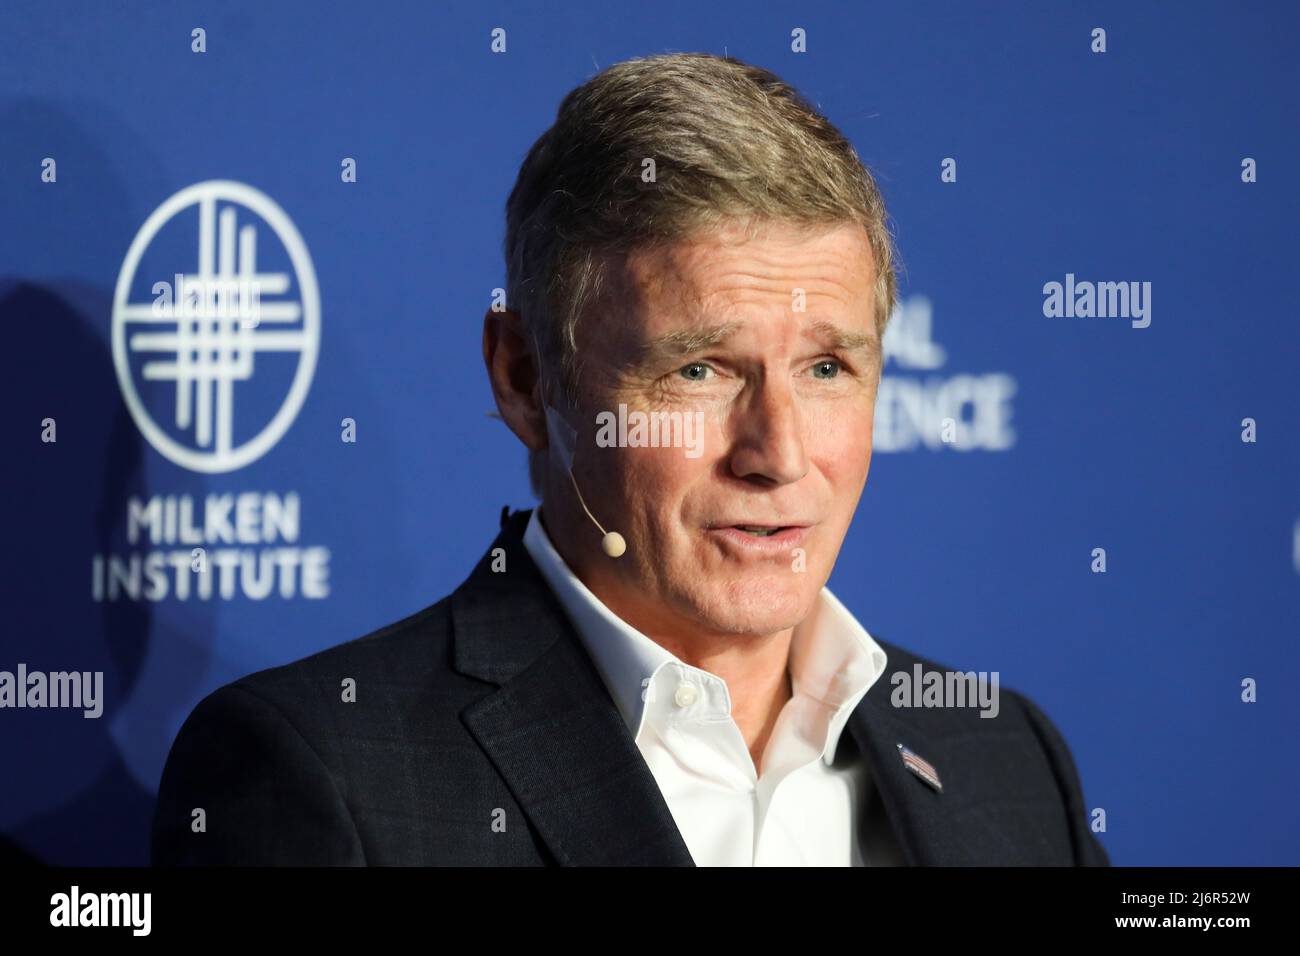 Joe Preston, President and CEO of New Balance Athletics, Inc. speaks at the  2022 Milken Institute Global Conference in Beverly Hills, California, U.S.,  May 3, 2022. REUTERS/David Swanson Stock Photo - Alamy